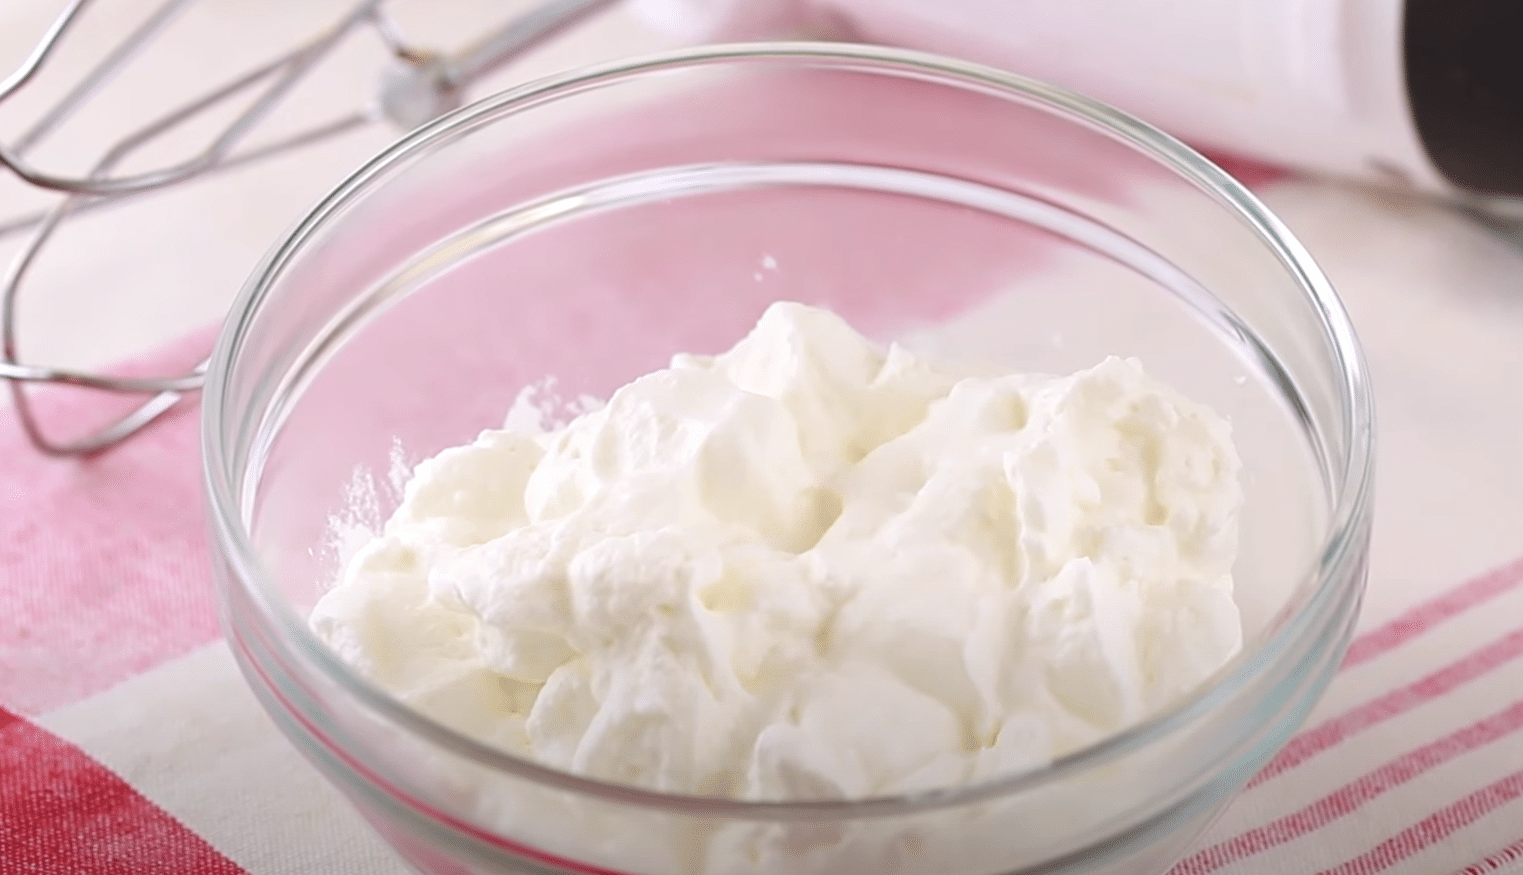 Can you make whipped cream from media crema? - Foodly